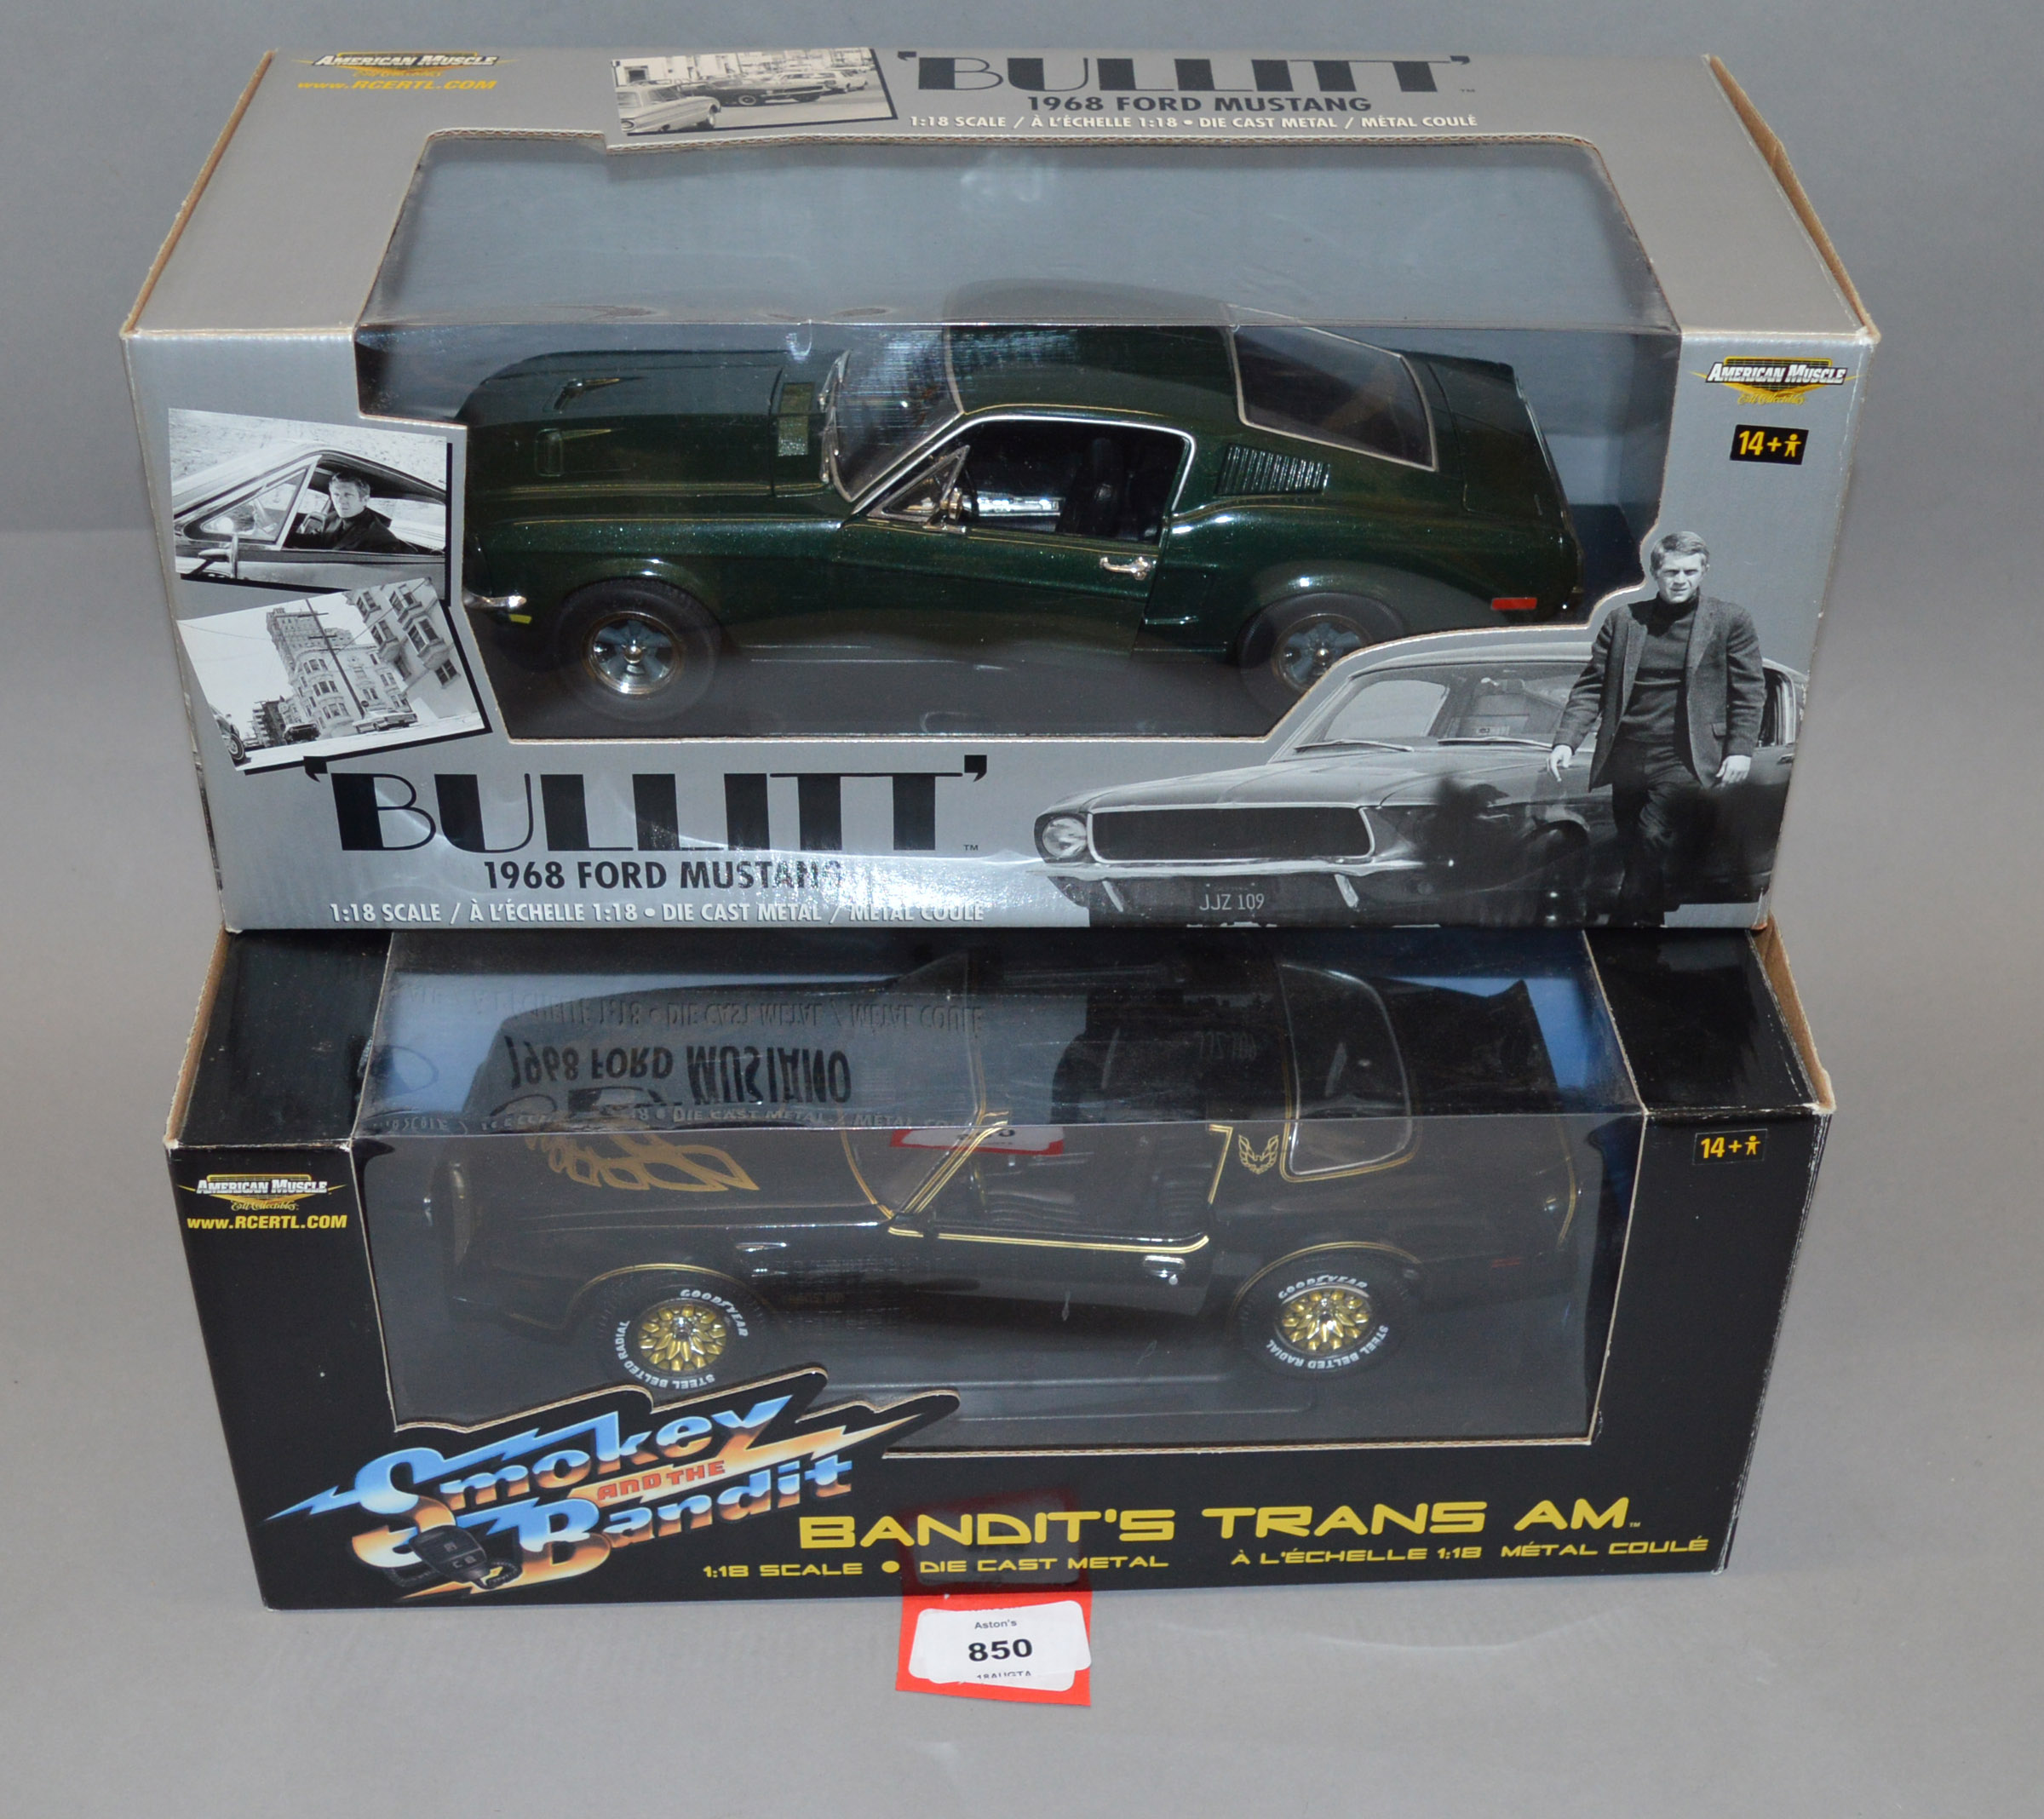 Four boxed Film and TV related diecast model cars in 1:18 scale,